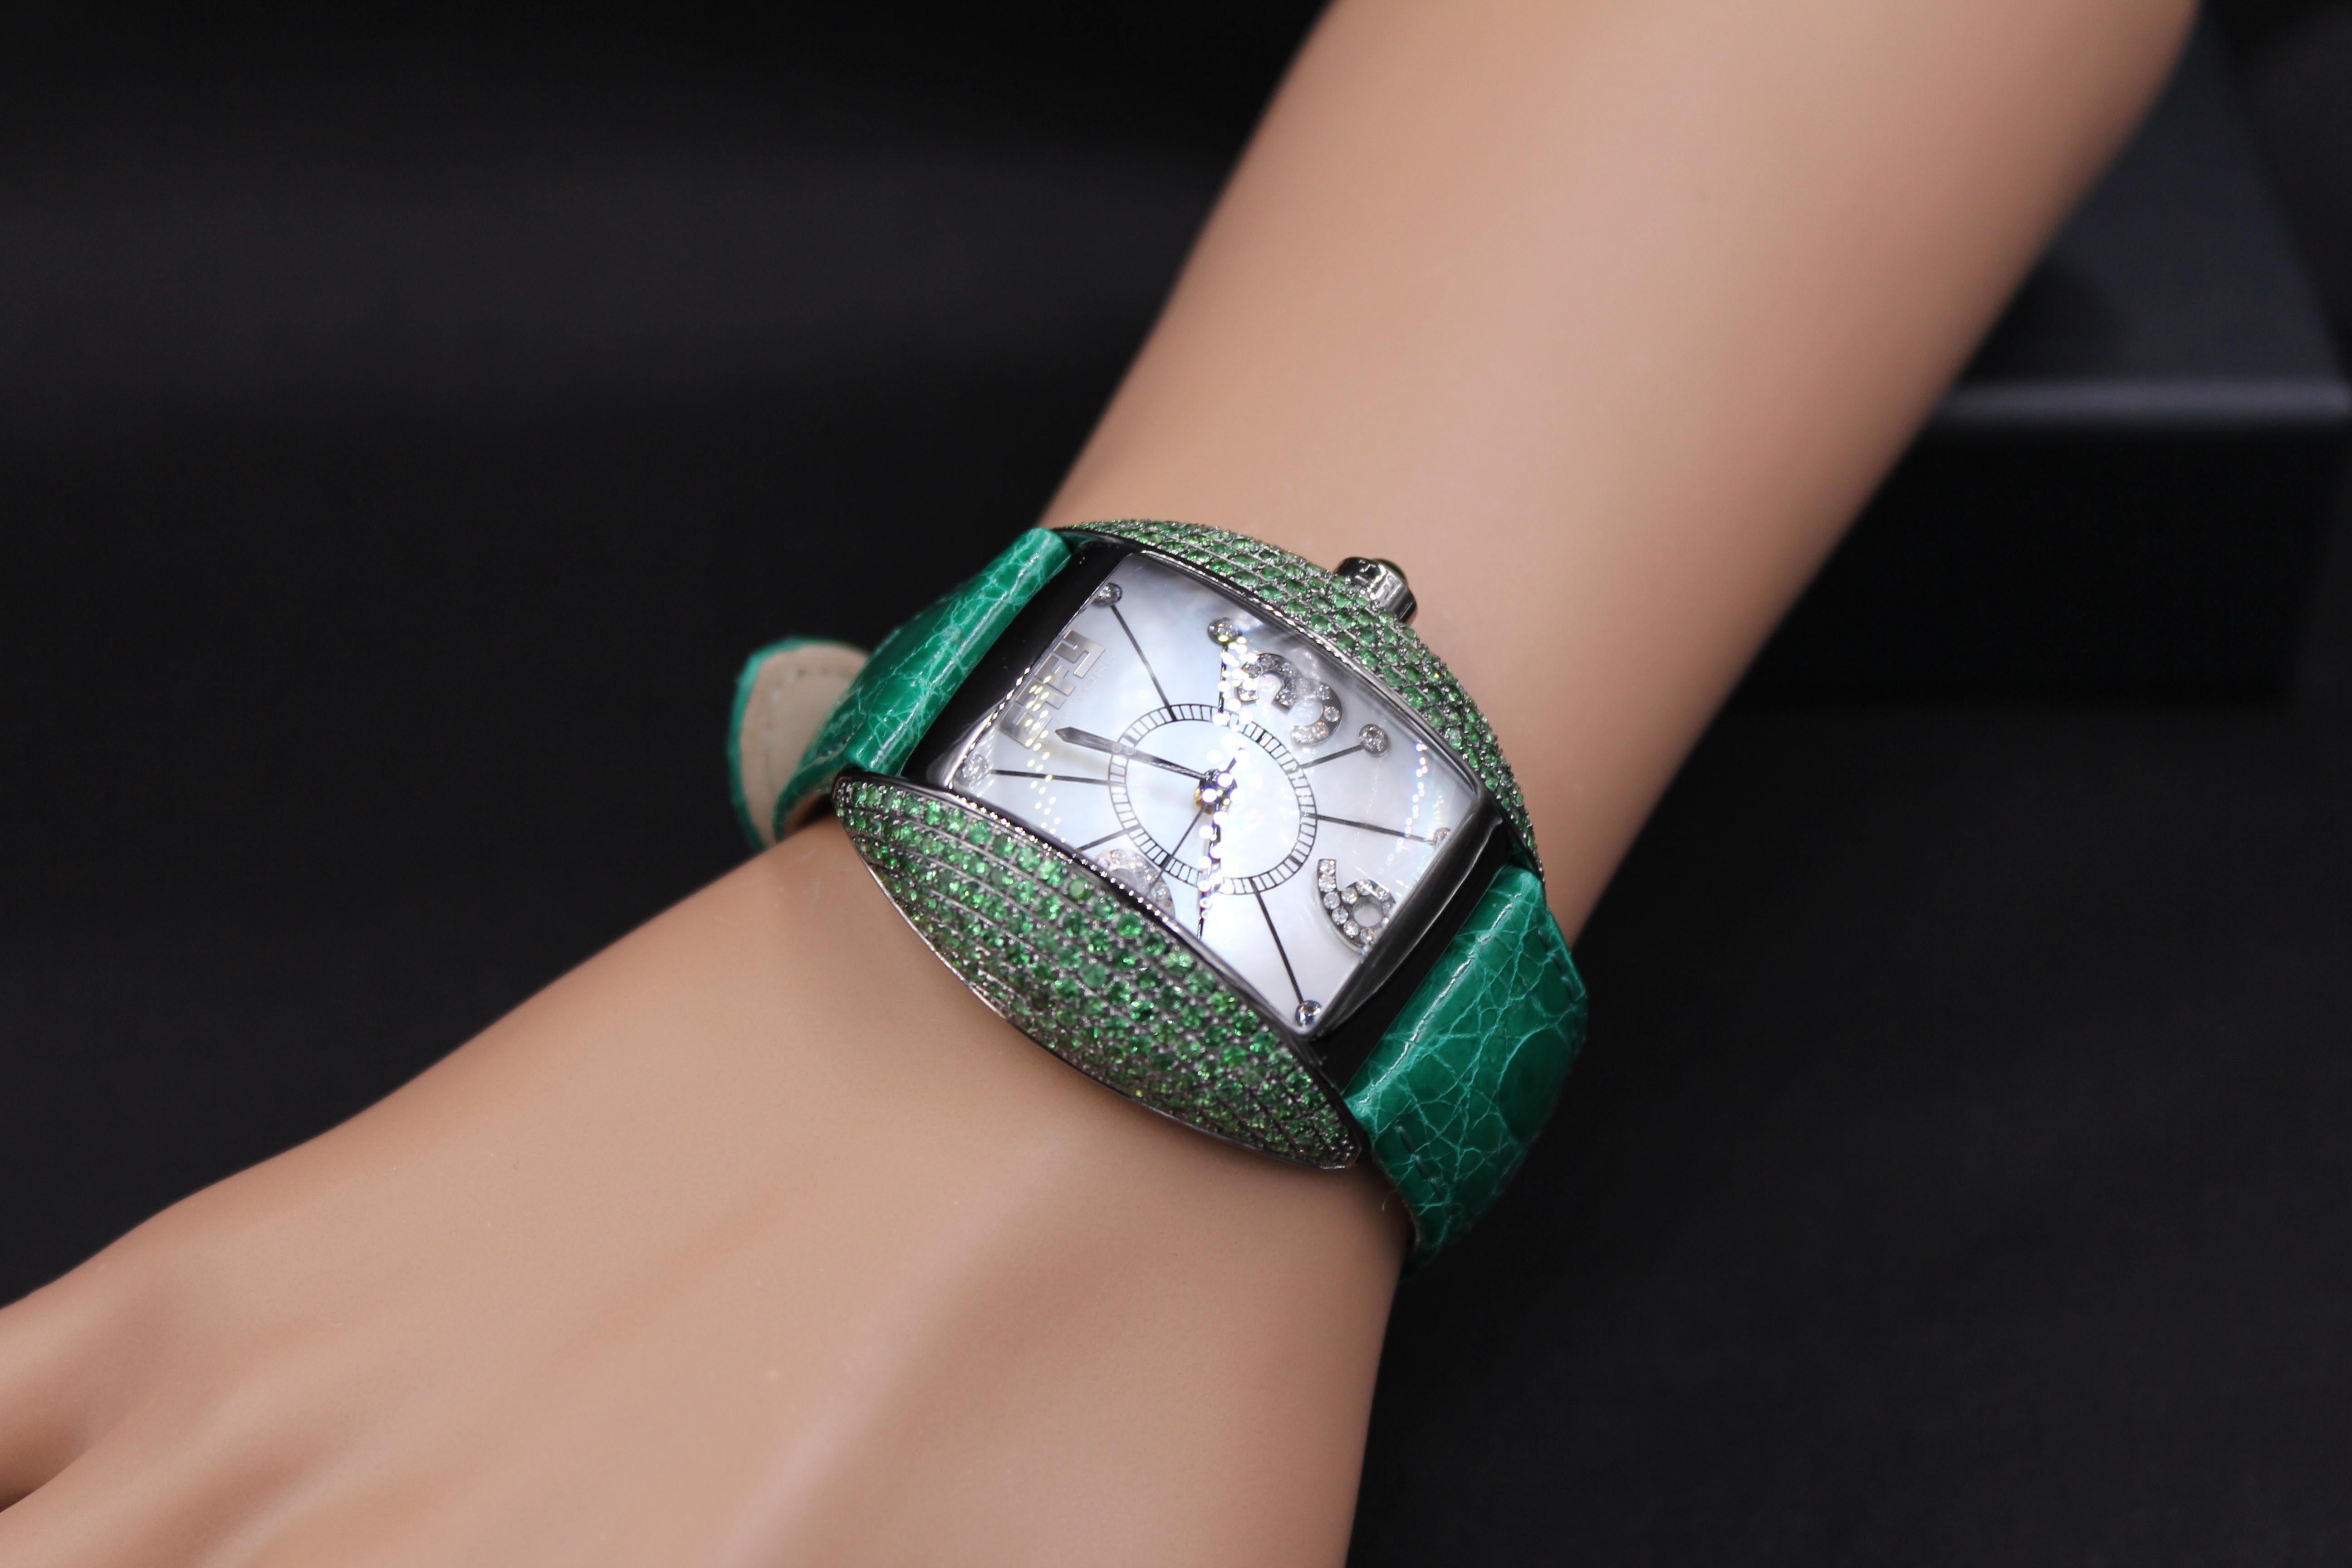 ·      Quality Swiss-Quartz movement guarantees precision timing
·         Mother-of-Pearl dial micro-paved with diamonds and gemstones enhances any dress style
·         Scratch-resistant sapphire glass lens
·         Genuine exotic lizard leather